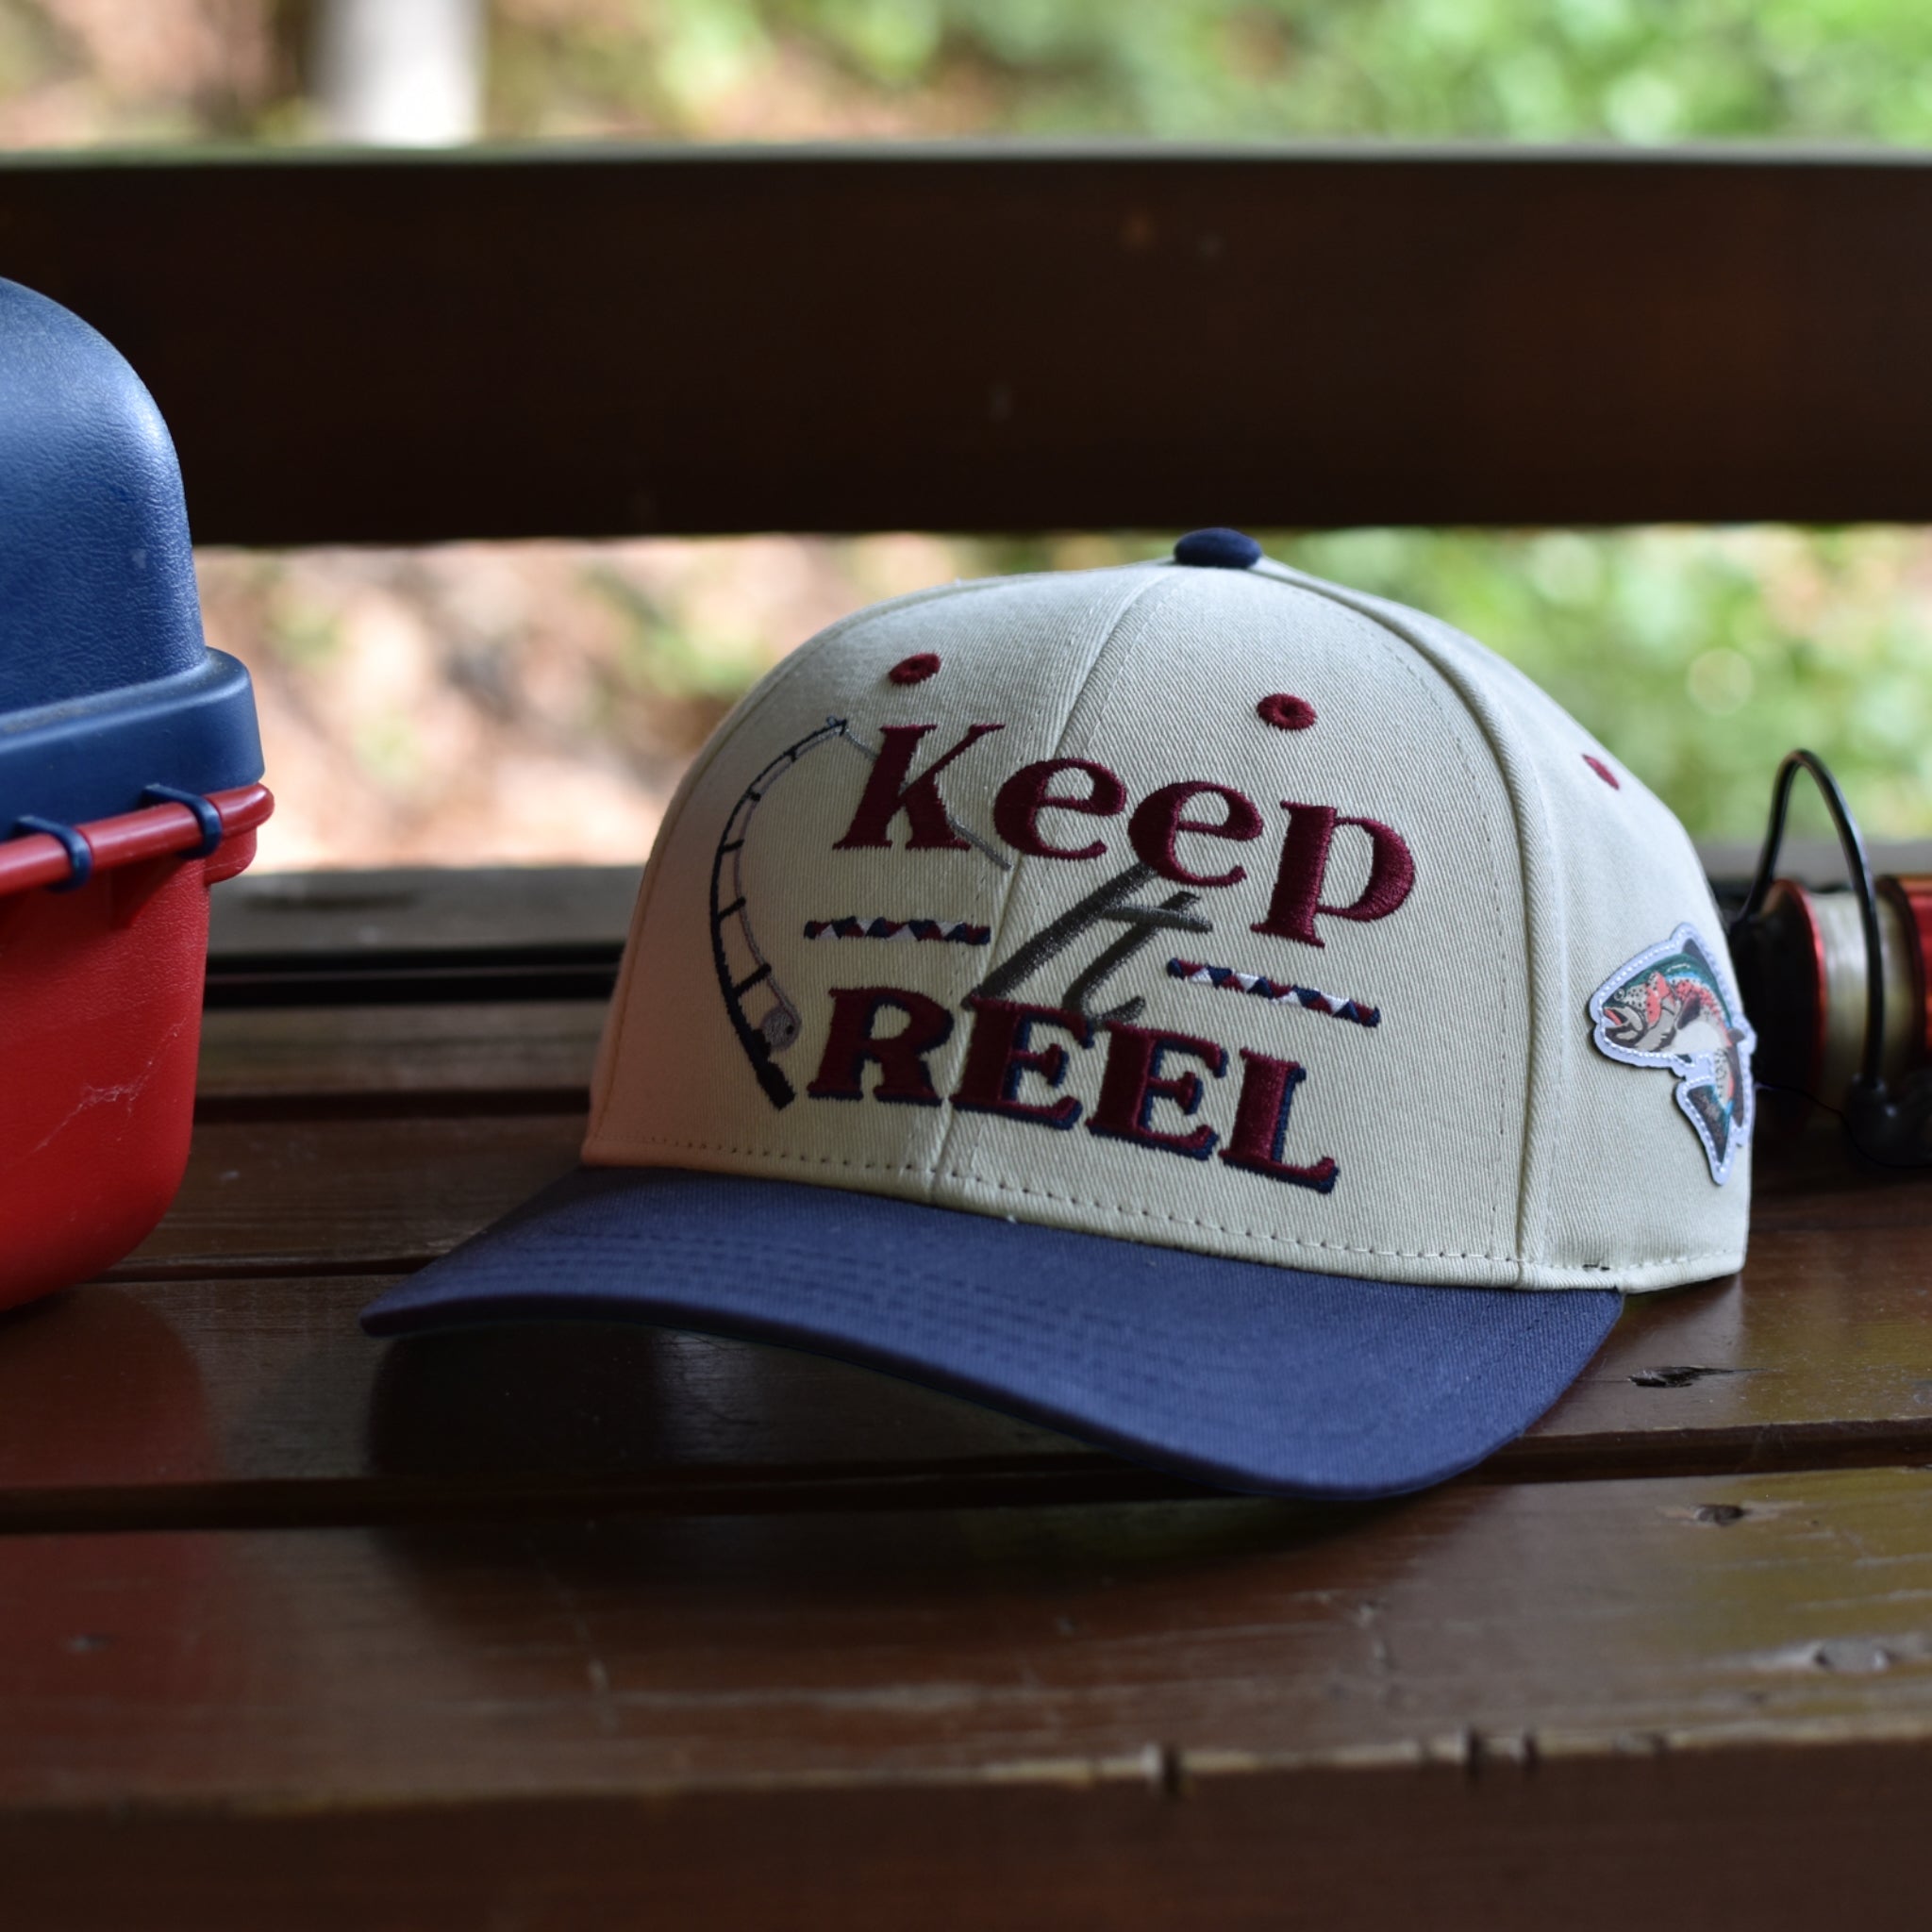 Fishing Hats with Vintage Style | Keep It Reel Snapback